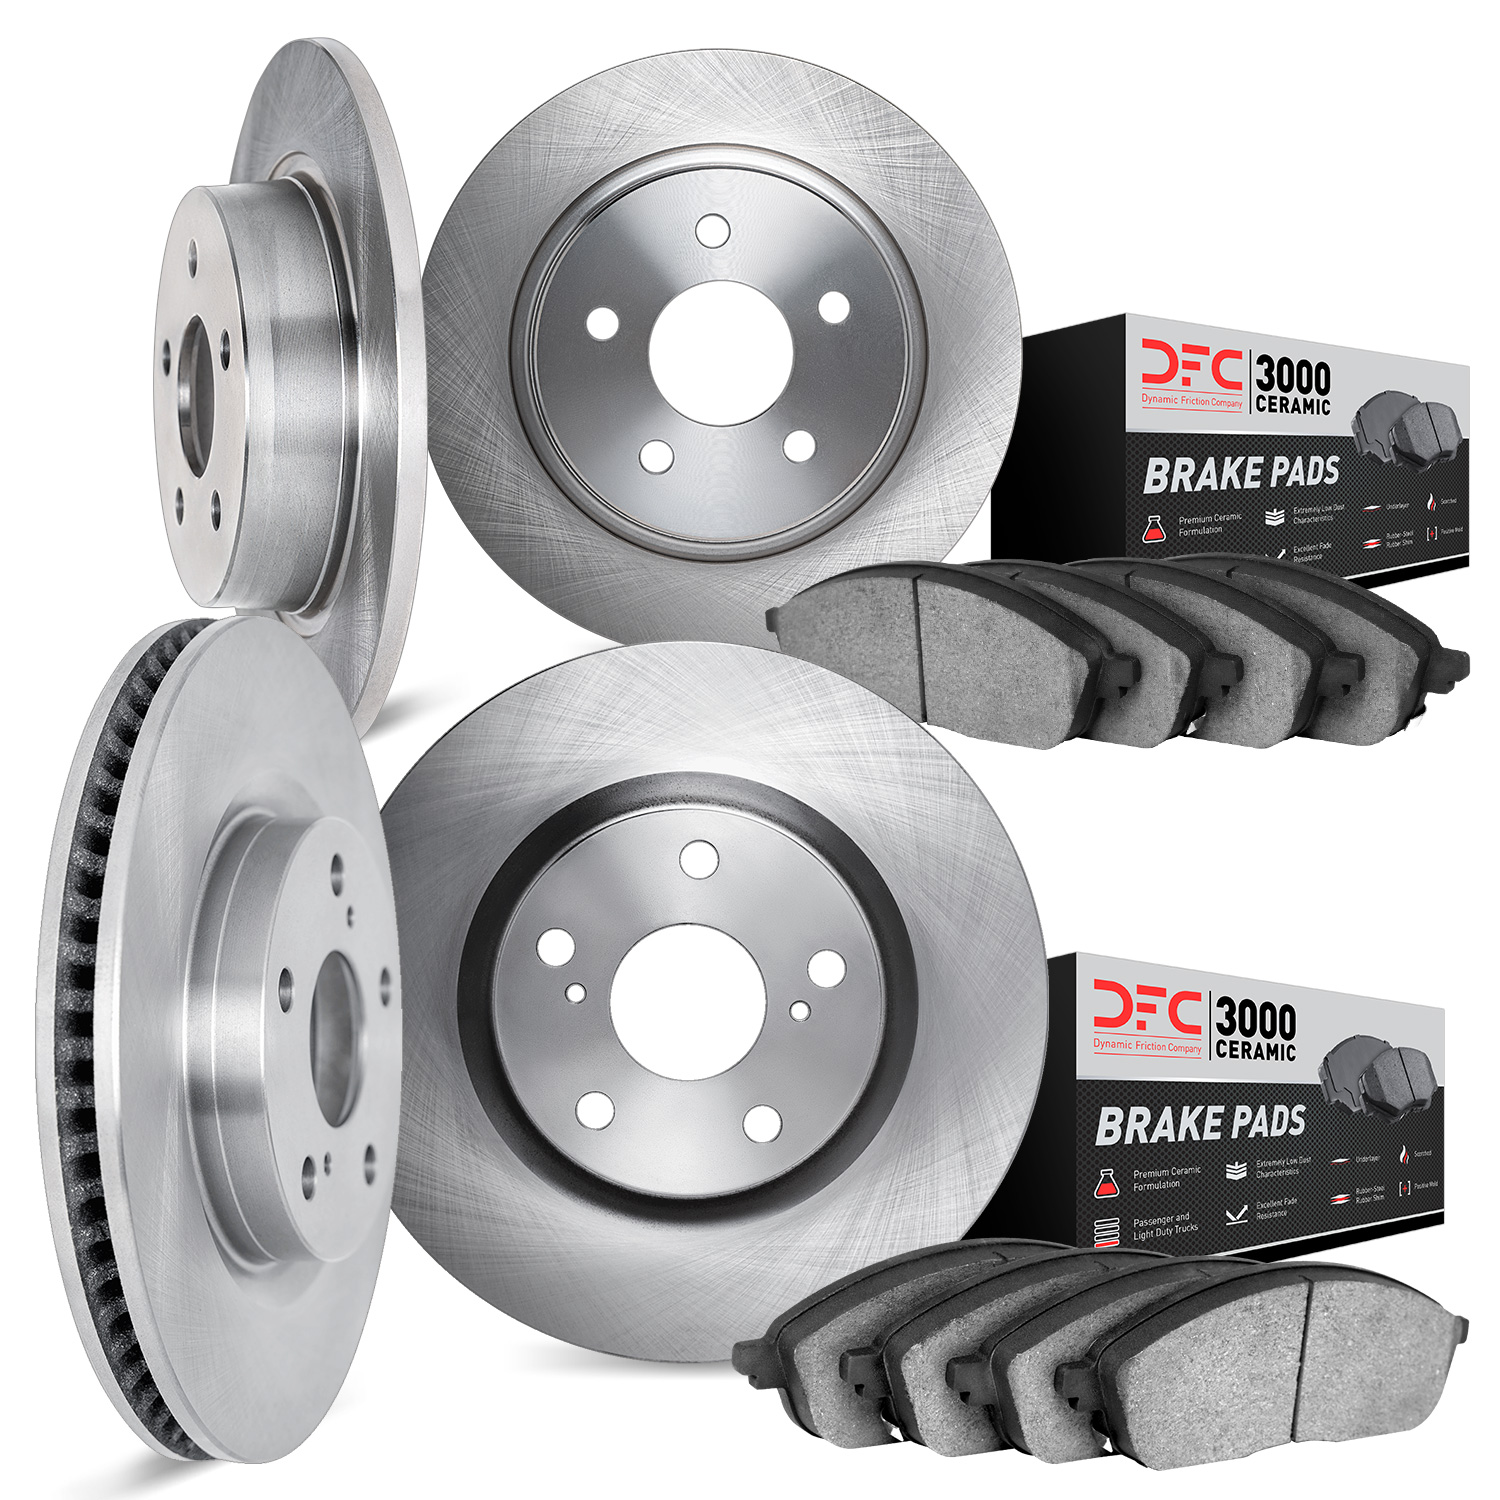 6304-73054 Brake Rotors with 3000-Series Ceramic Brake Pads Kit, 2001-2005 Audi/Volkswagen, Position: Front and Rear